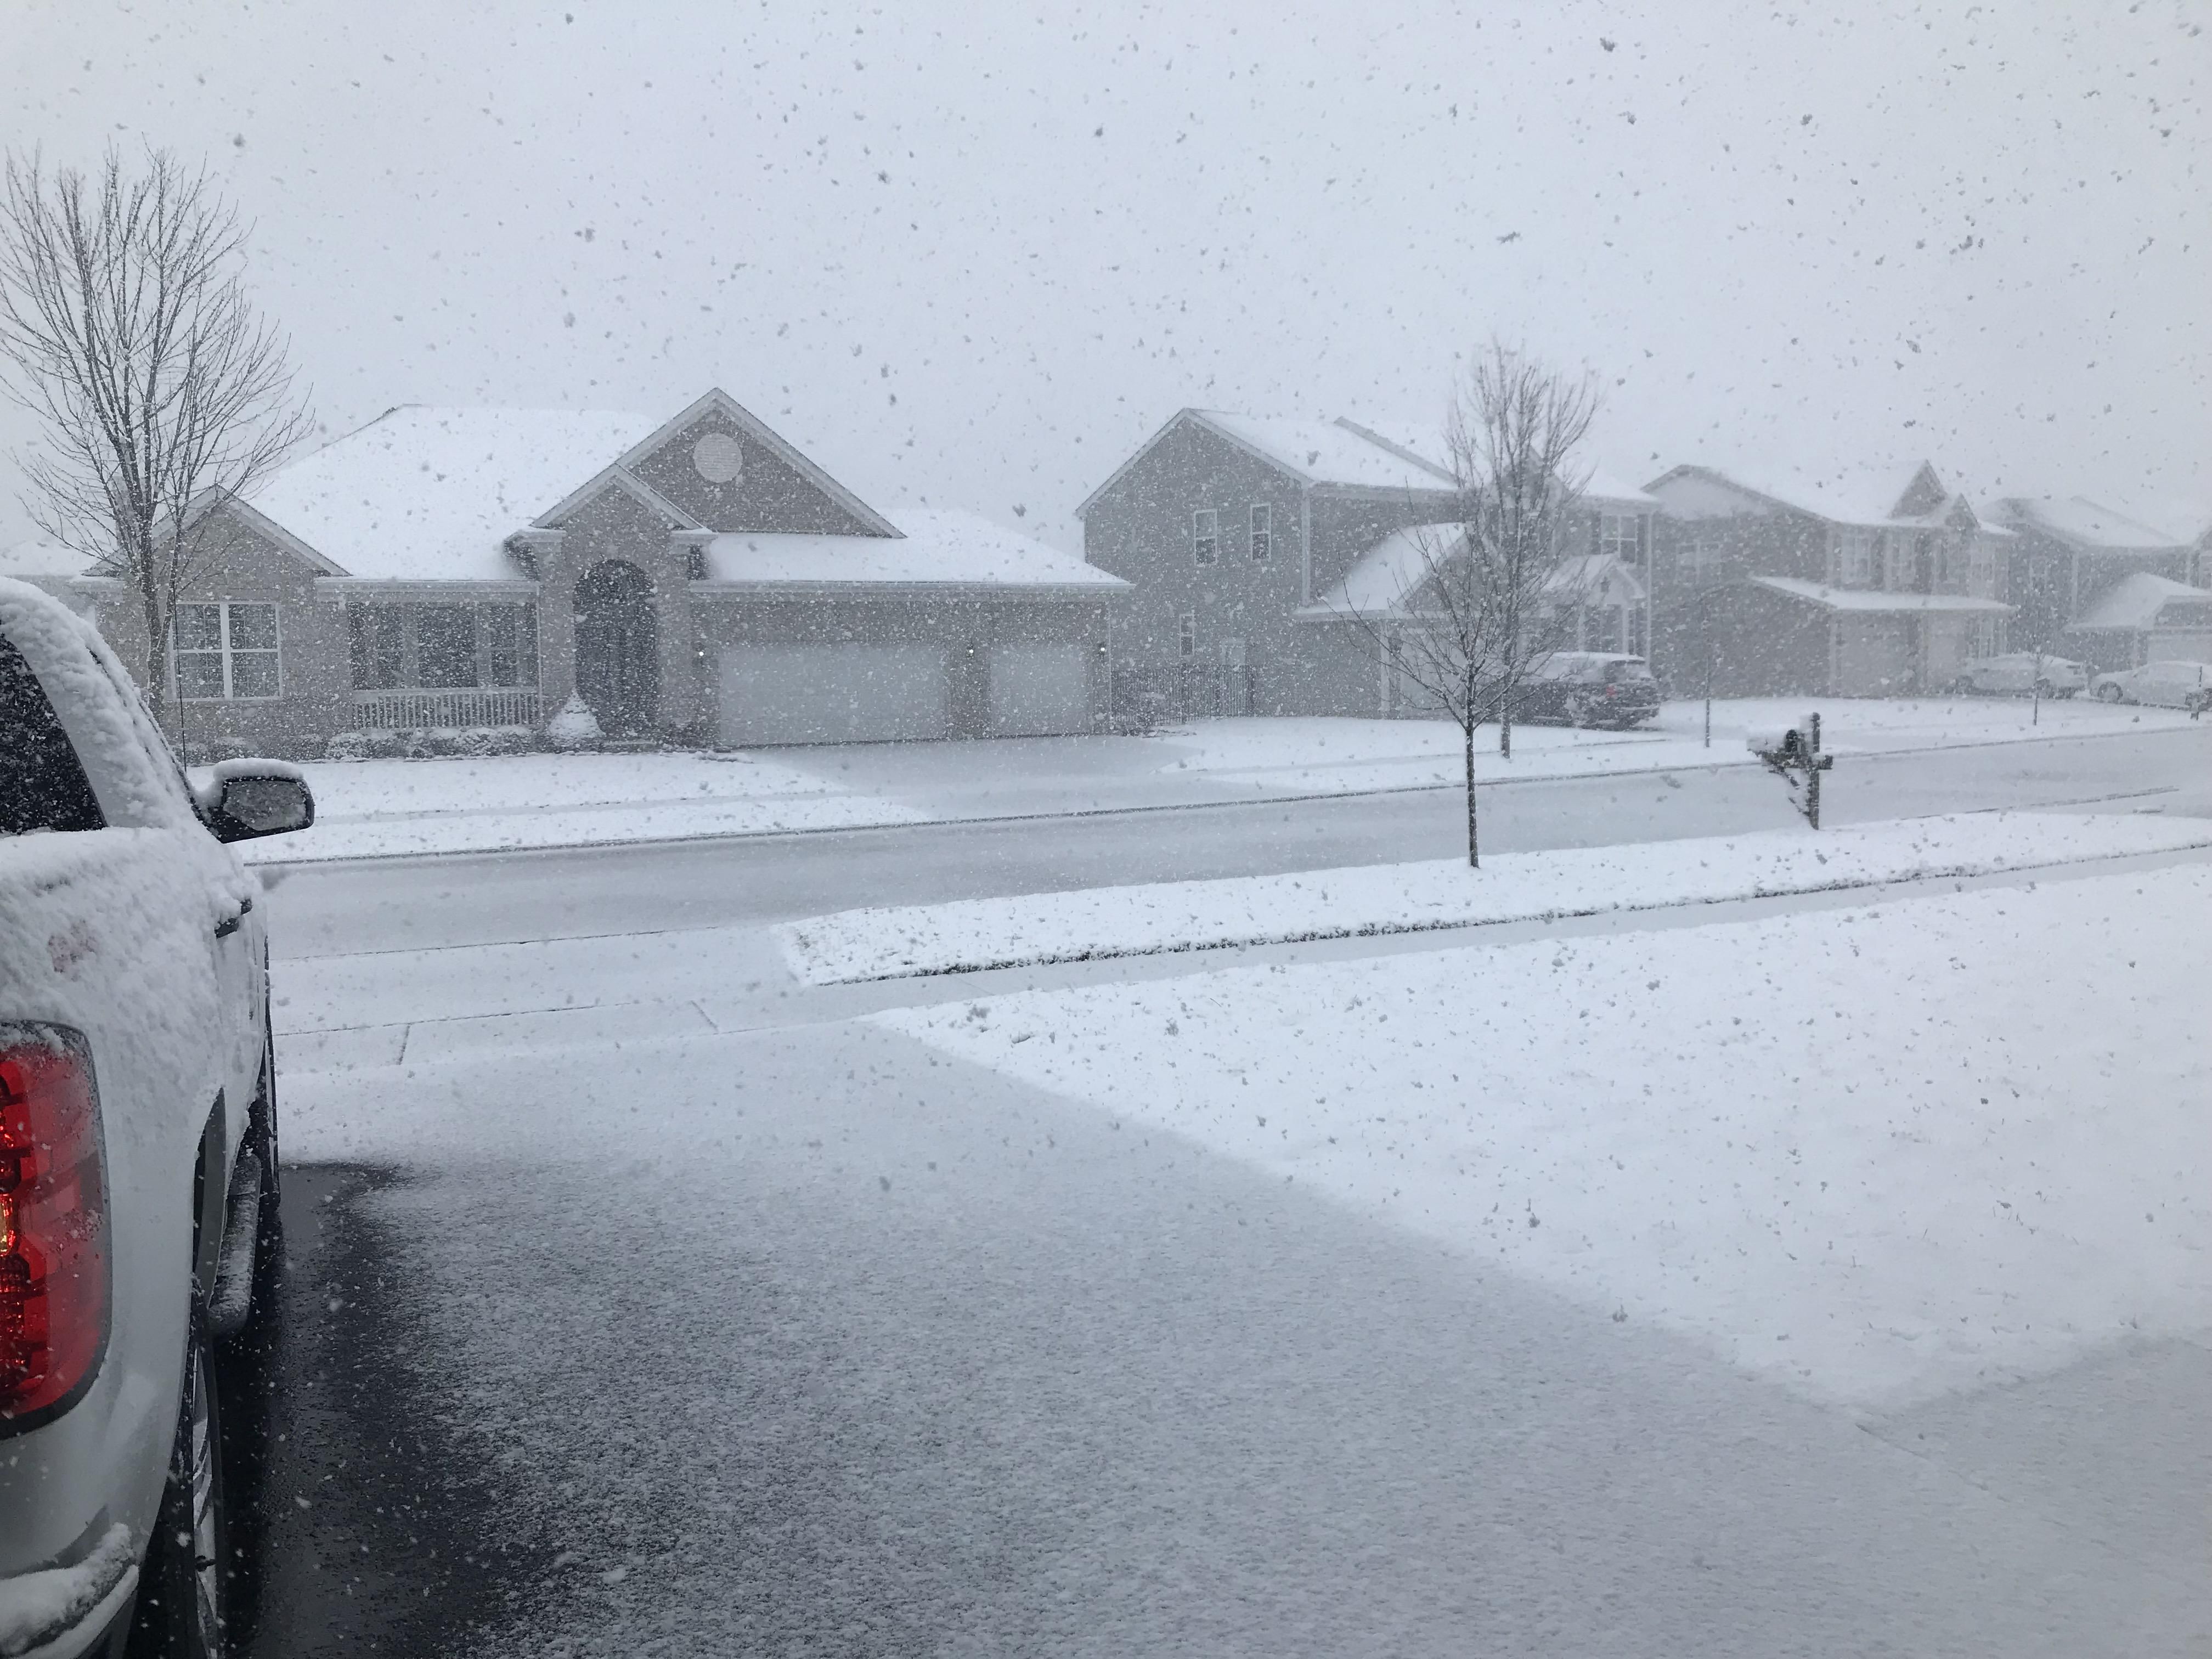 HBO really pulled out all of the stops to promote Game of Thrones. Snow in April? WTF?!